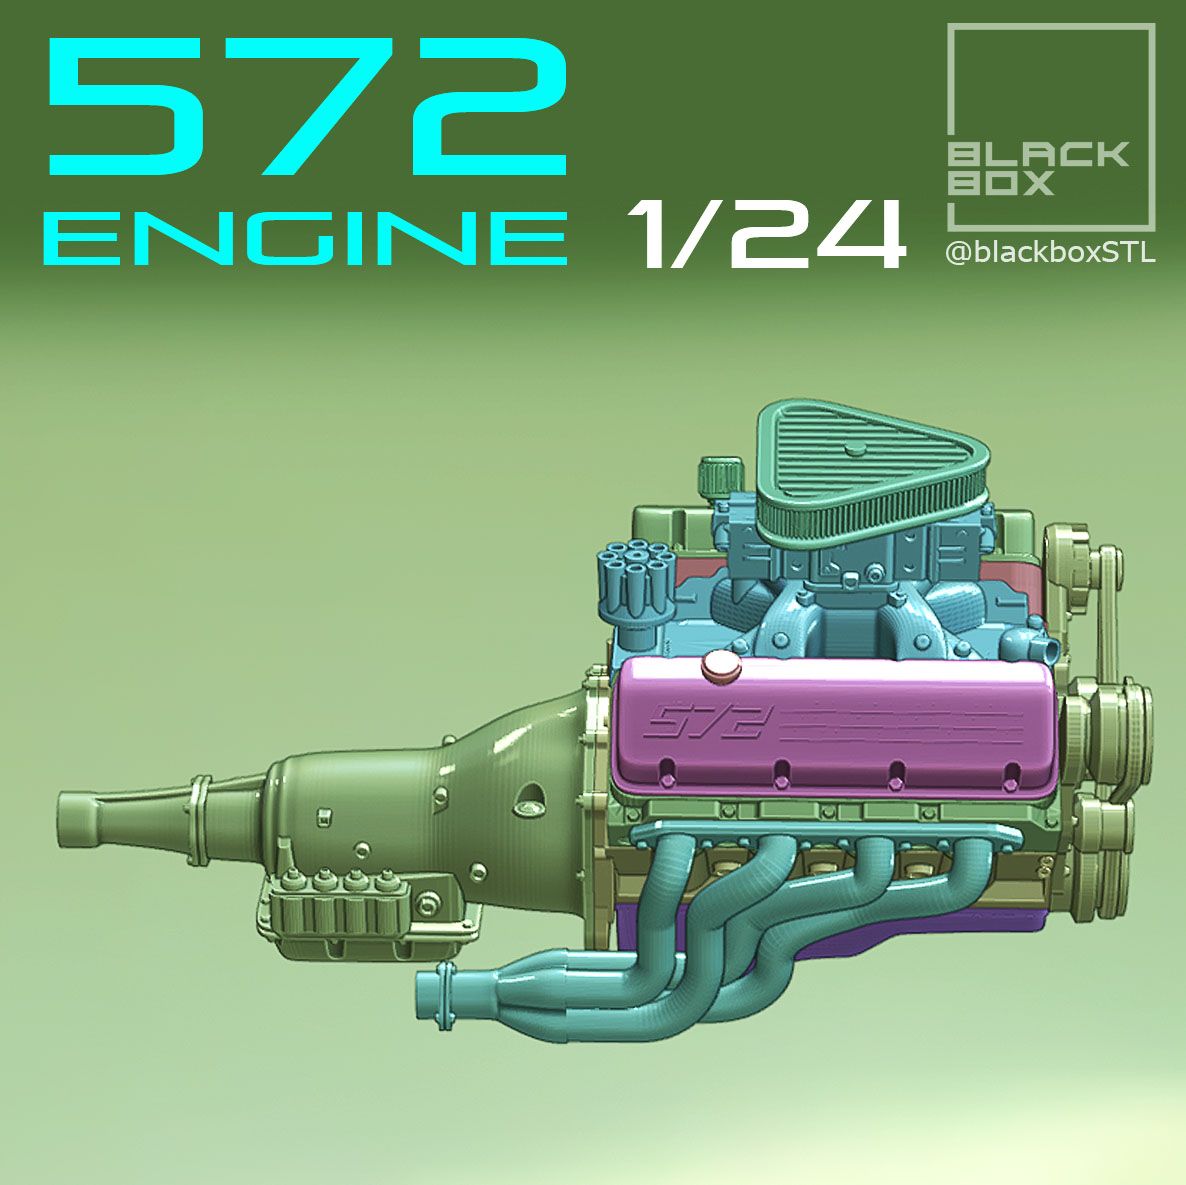 e3.jpg Download file 572 ENGINE 1-24th for modelkits and diecast • 3D printer template, BlackBox